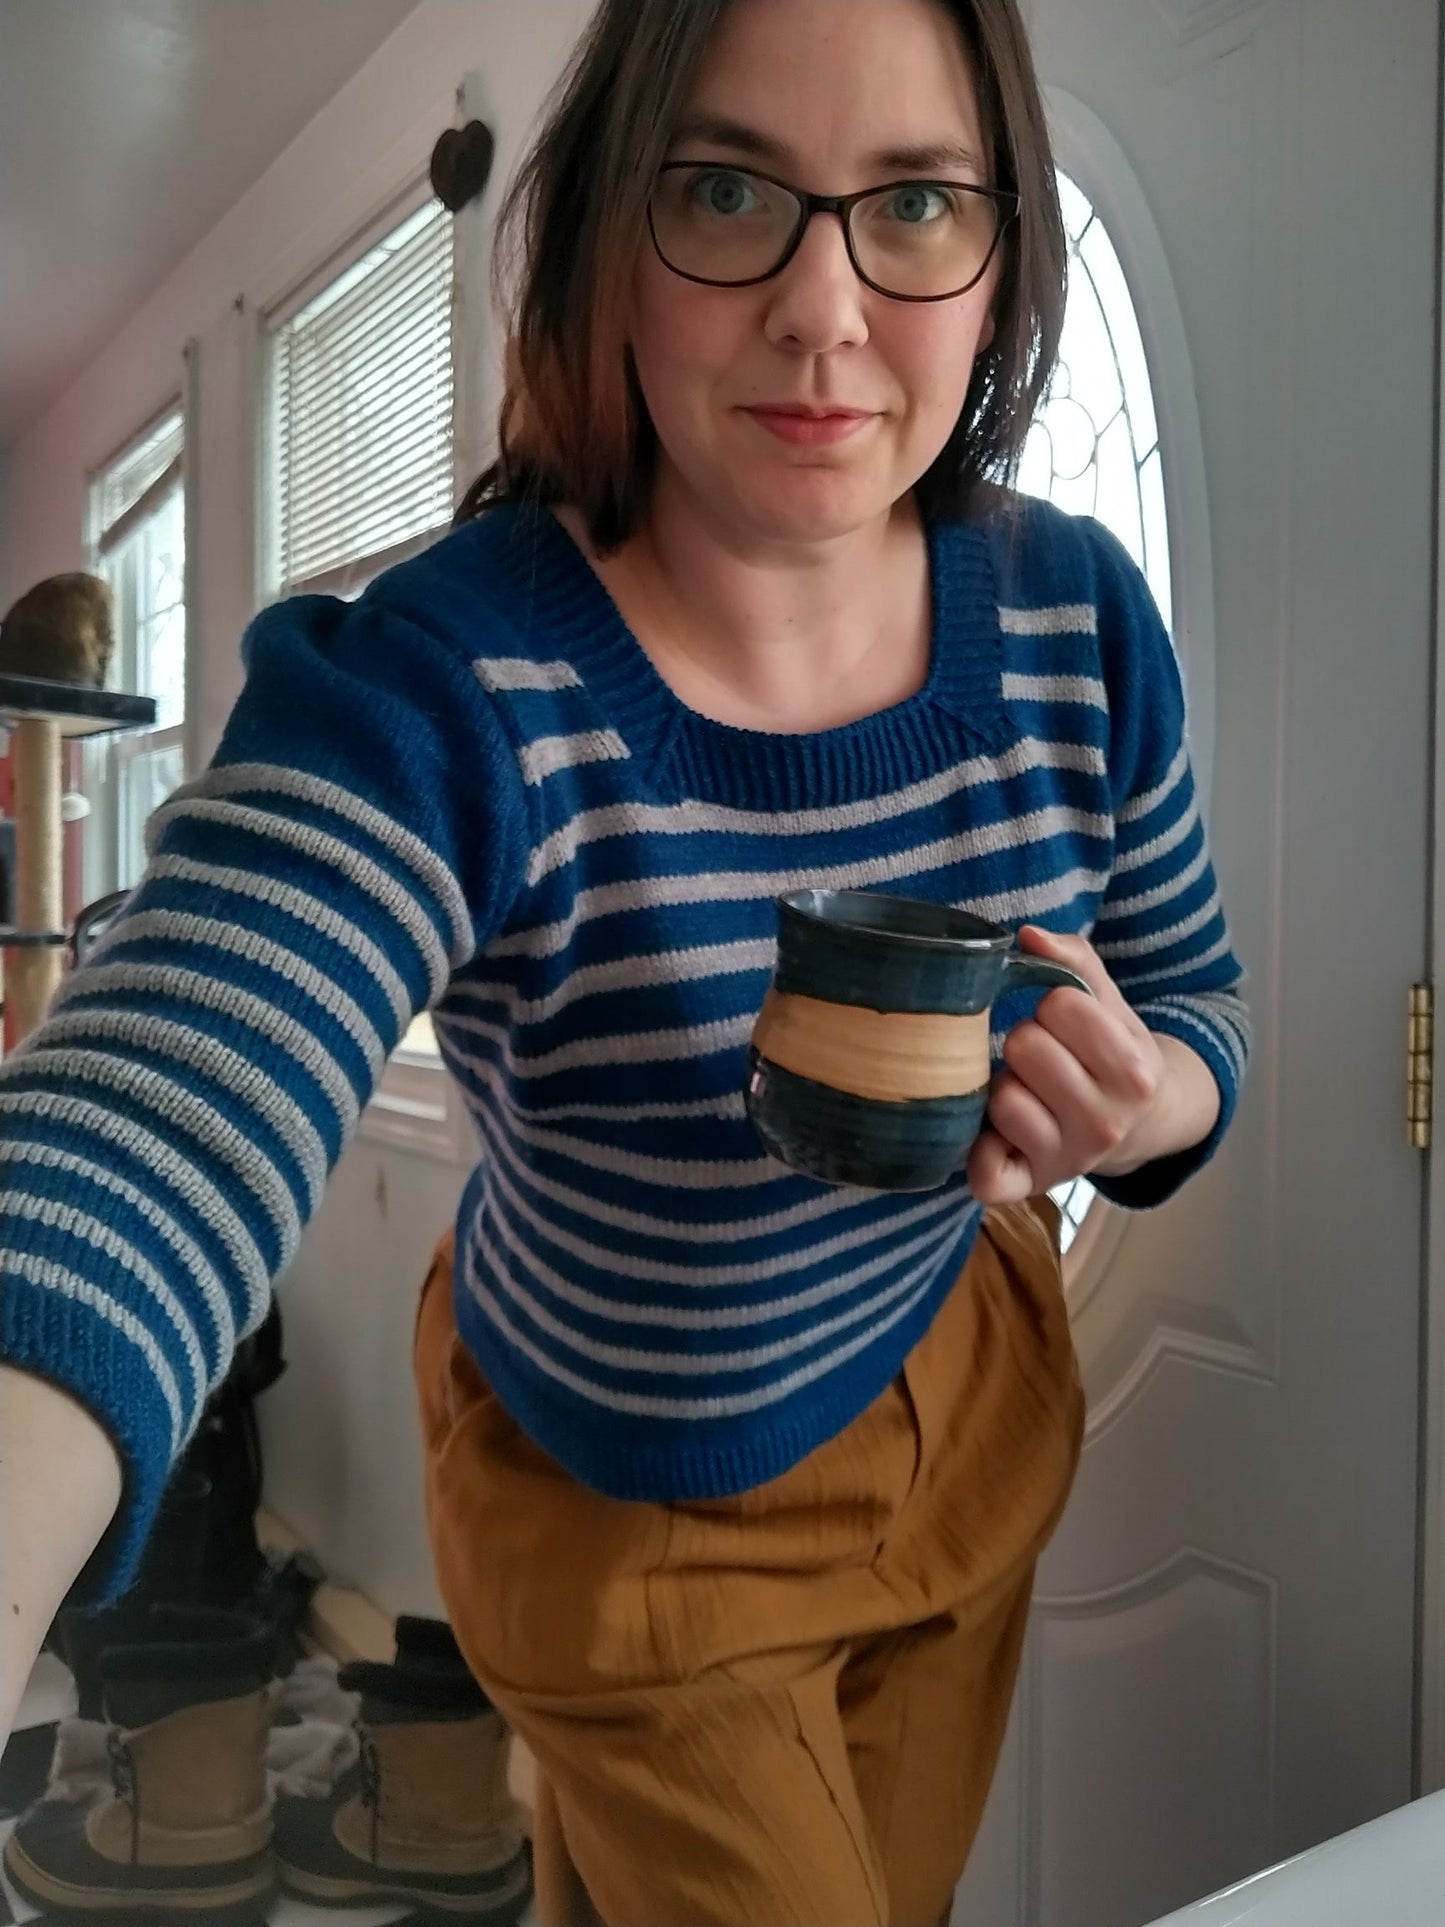 A person holds a mug, leaning forward towards the camera. They wears a sweater knit with blue and white stripes, featuring a square neckline and gathered sleeves, with orange-brown pants.